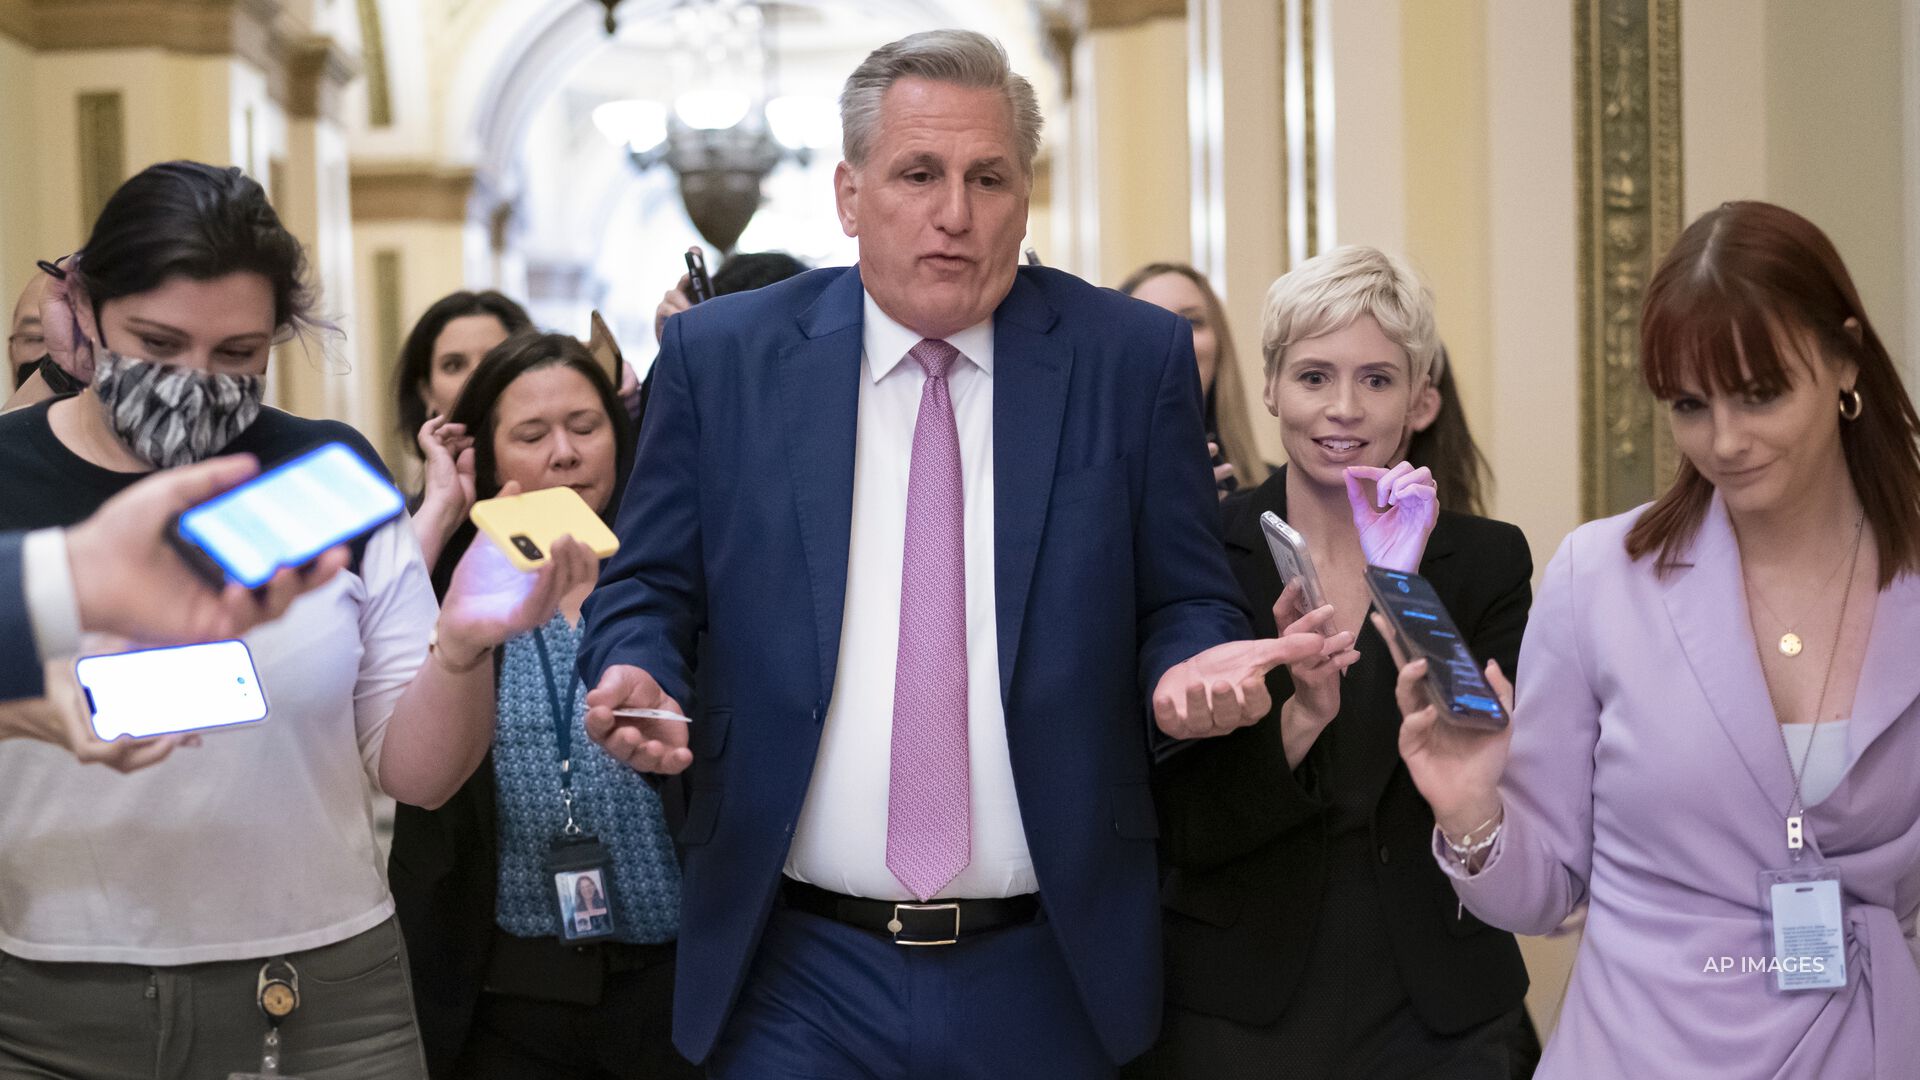 The Capitol riots committee sent subpoenas to House members, including Kevin McCarthy.